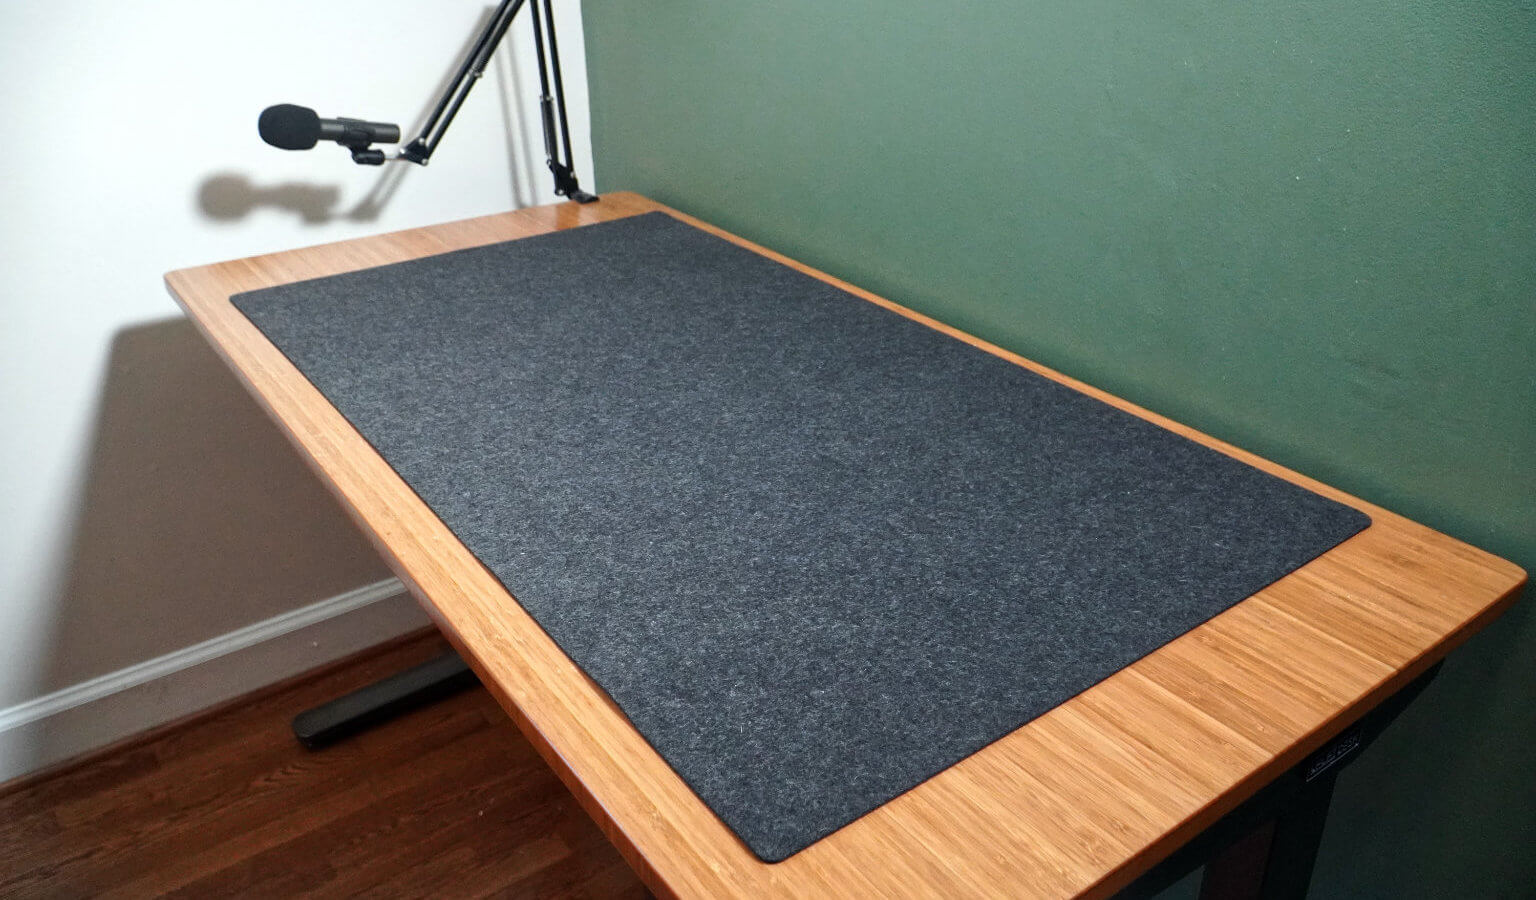 How the Grovemade Desk Pad Transformed My Home Office: A Review